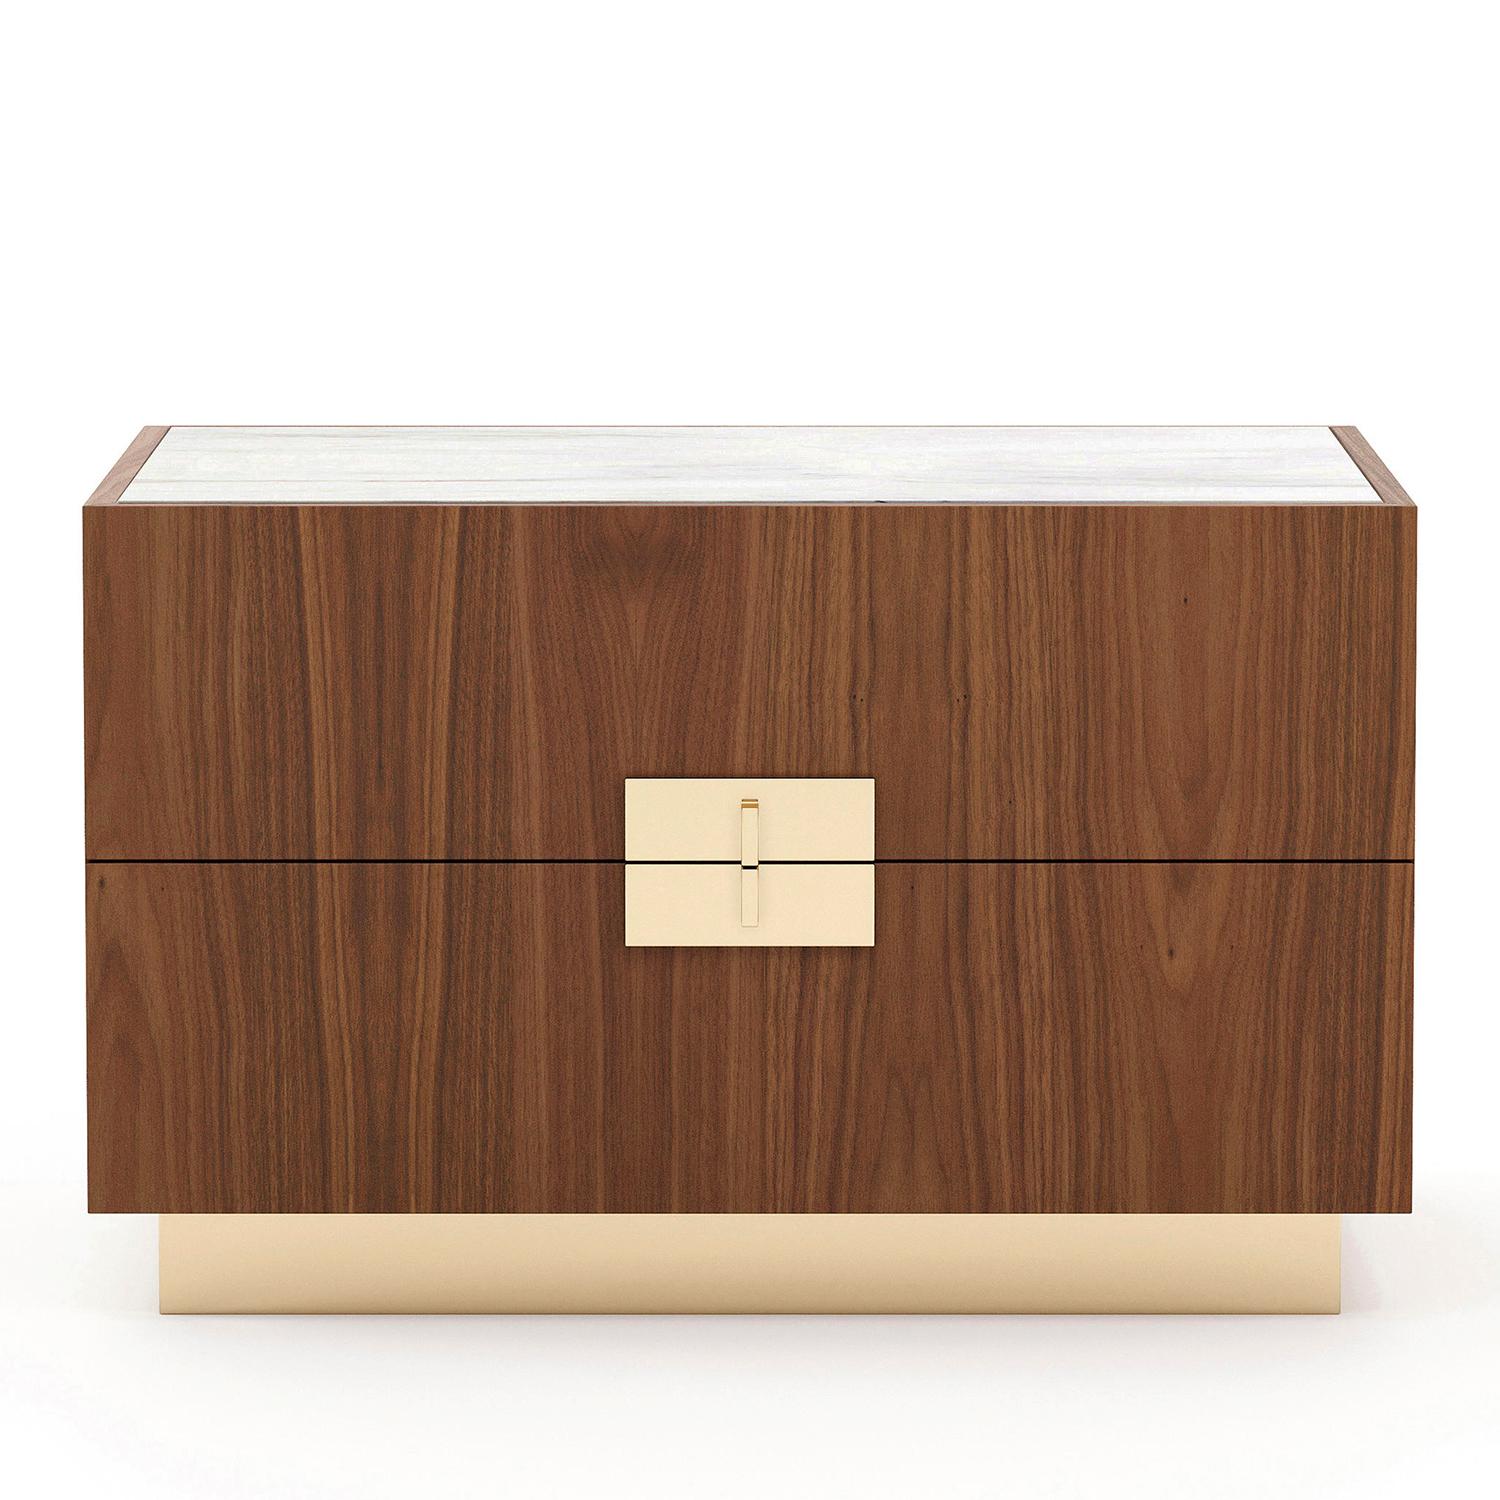 Nightstand Lenny with structure in veneered walnut wood,
with white marble top. Chest with 2 drawers, with easy glide system. 
Base and handles in polished stainless steel in gold finish.
Also available with other wood and metal finishes
on